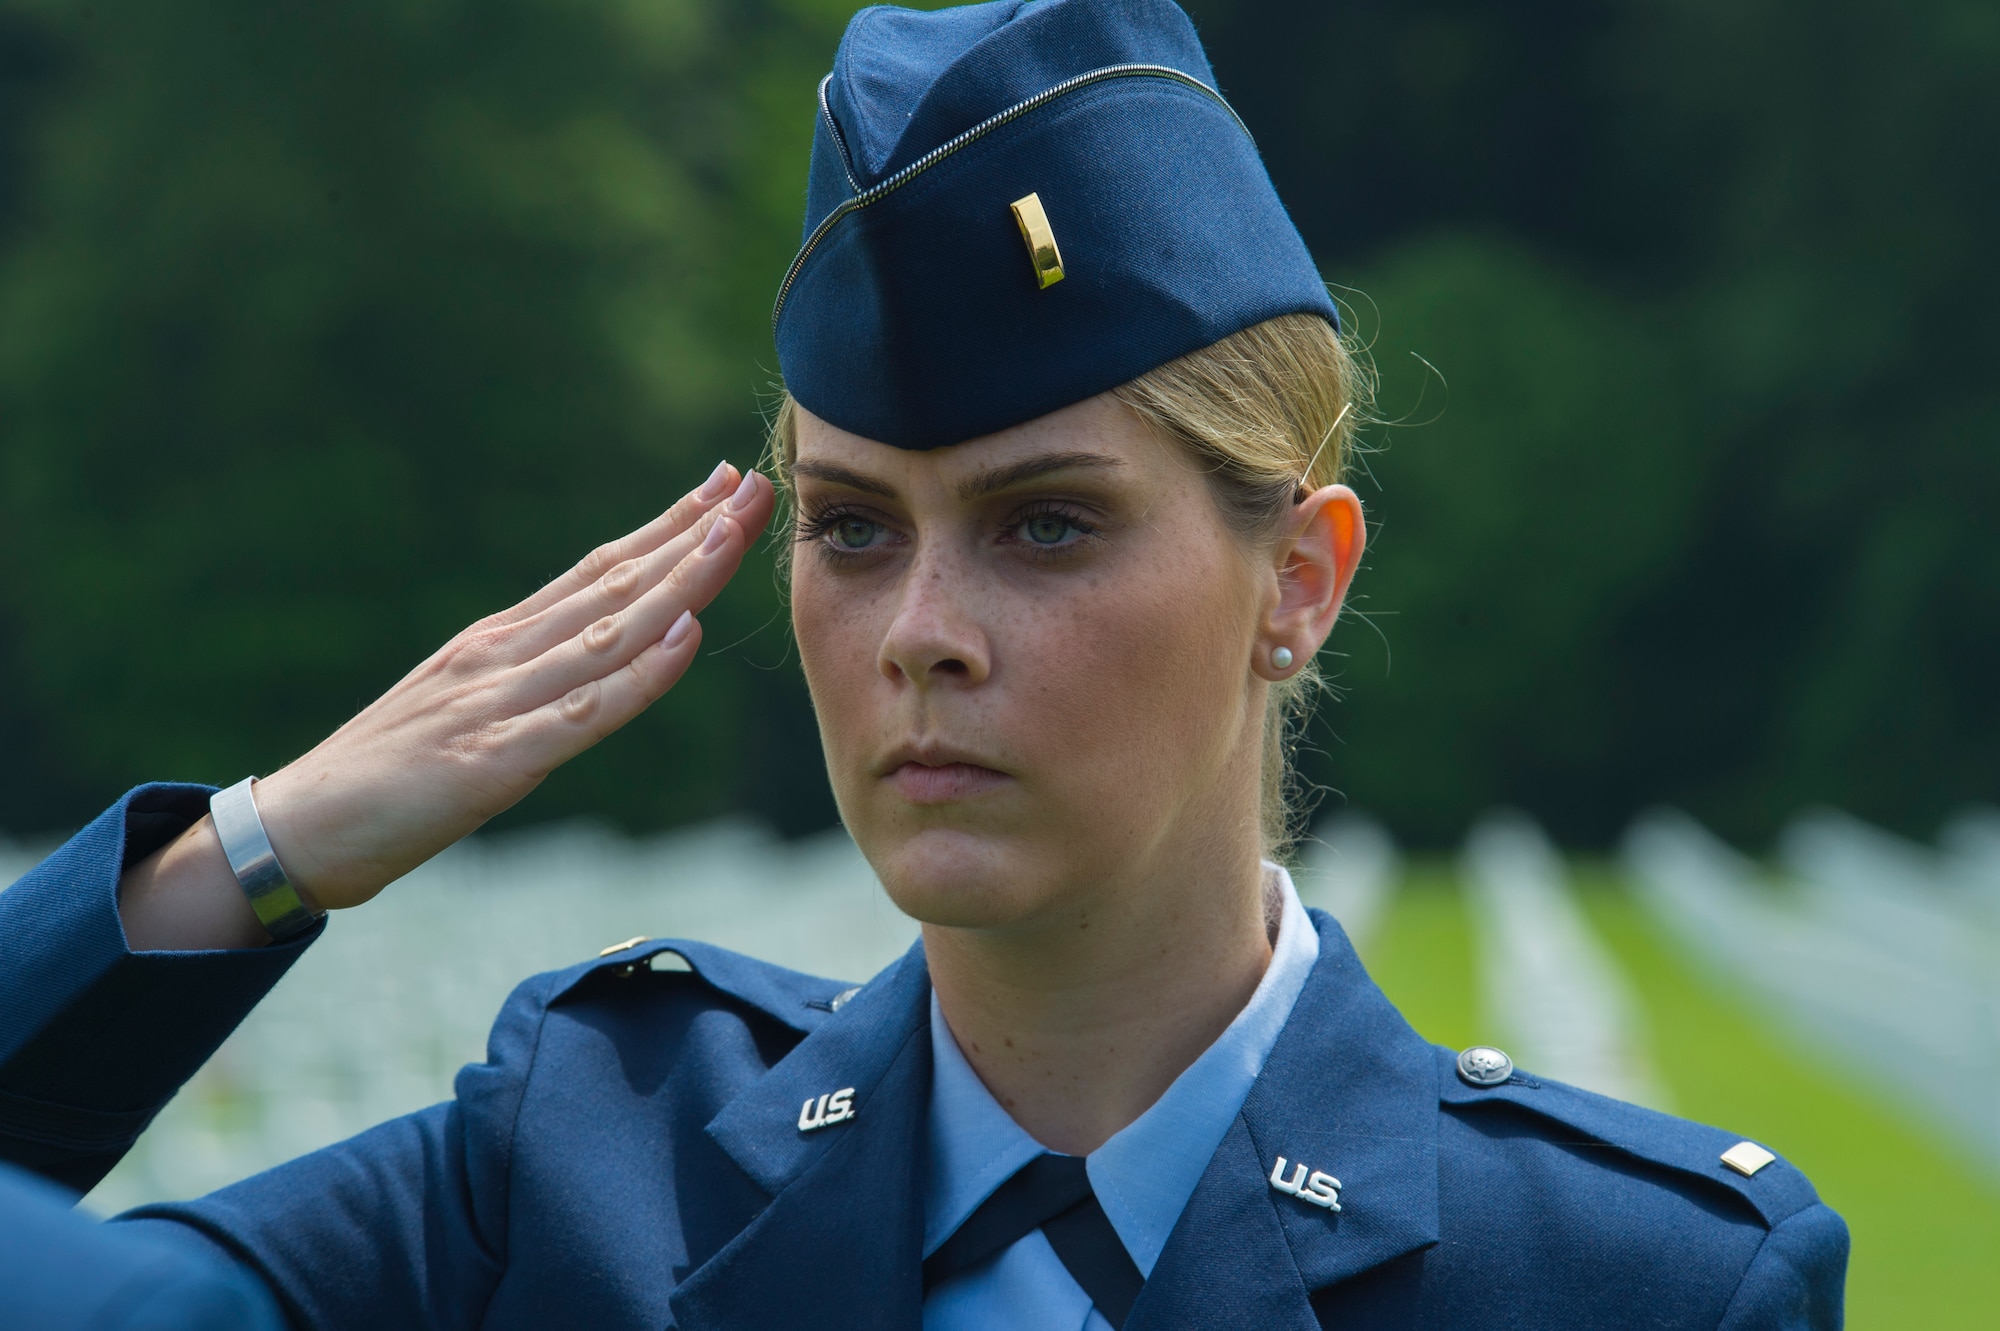 U.S. Air Force 2nd Lt. Melanie Gruenbaum, 52nd Mission Support Group executive officer, salutes as part of a ceremonial flight before a Memorial Day ceremony at the Luxembourg American Cemetery and Memorial in Luxembourg, May 28, 2016. Airmen from Spangdahlem Air Base, Germany, served as a ceremonial flight in service dress, caretakers of the cemetery's Luxembourg and U.S. flags, and escorts for guests to lay wreaths. (U.S. Air Force photo by Staff Sgt. Joe W. McFadden/Released)  